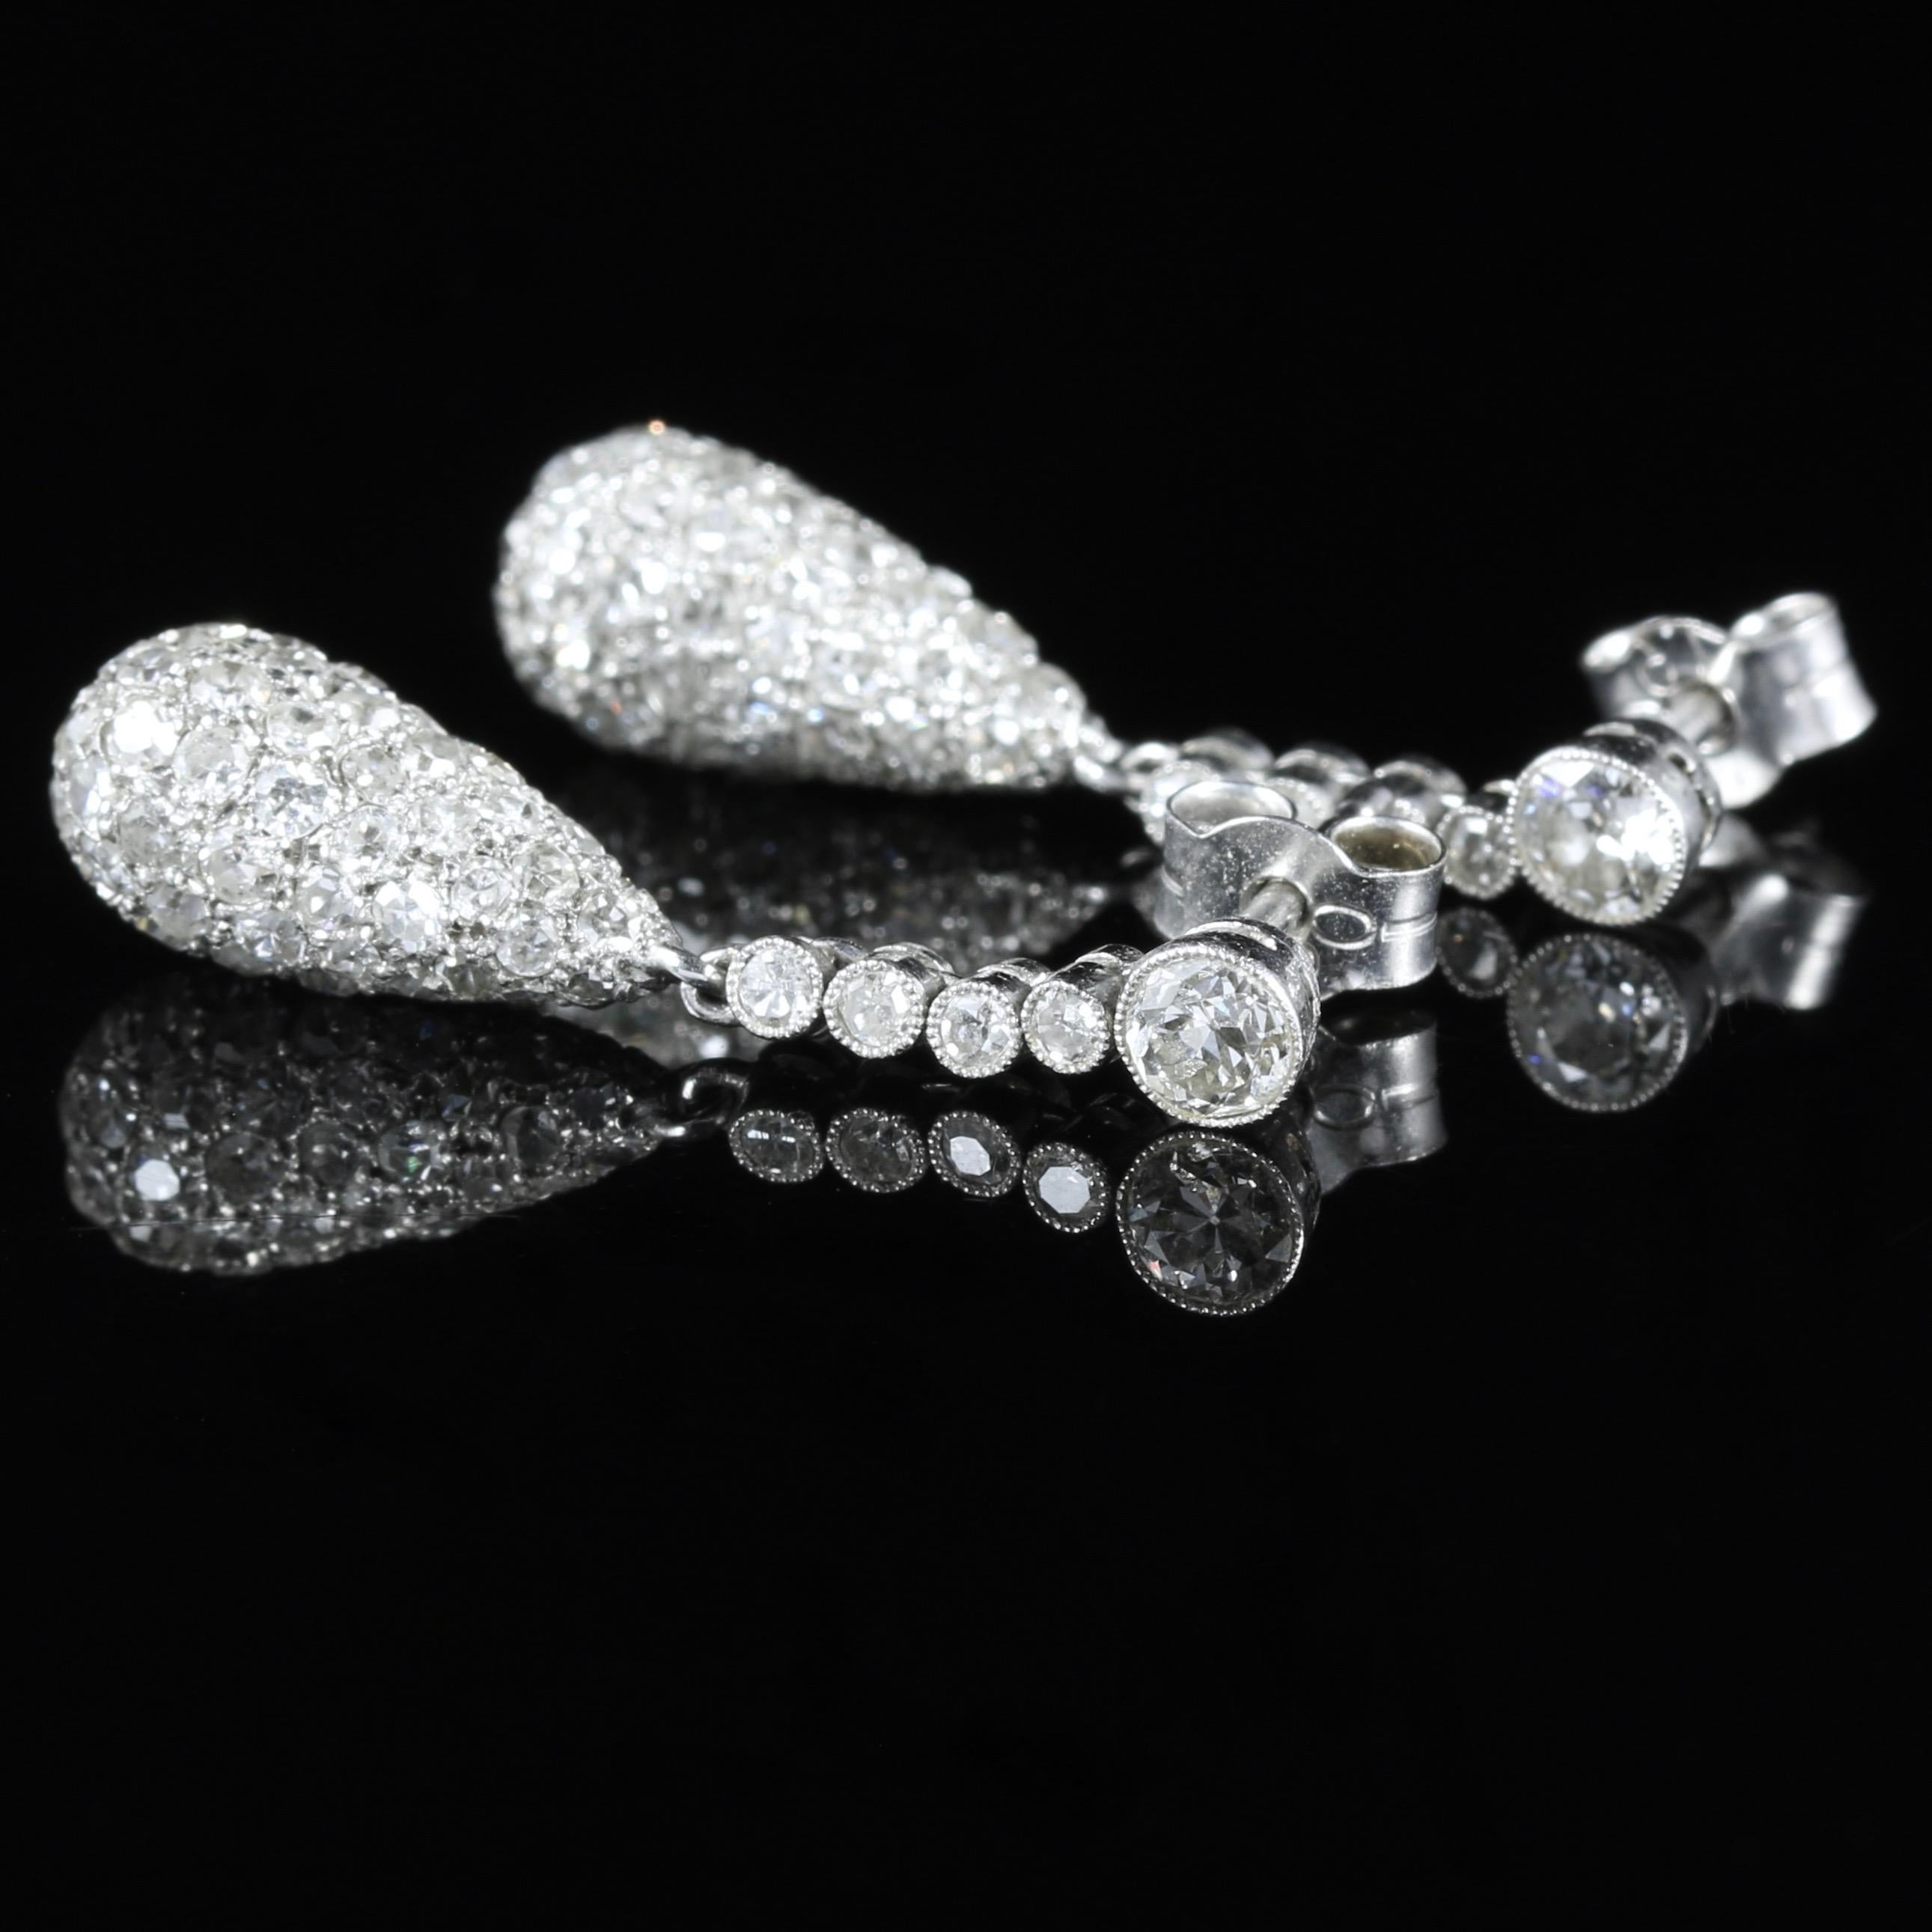 For more details please click continue reading down below...

These dropper earrings are set in 18ct White Gold.

Encrusted with over 7cts of old cut Diamonds, there are over 80 Diamonds in each earring. 

Diamonds sparkle continuously and